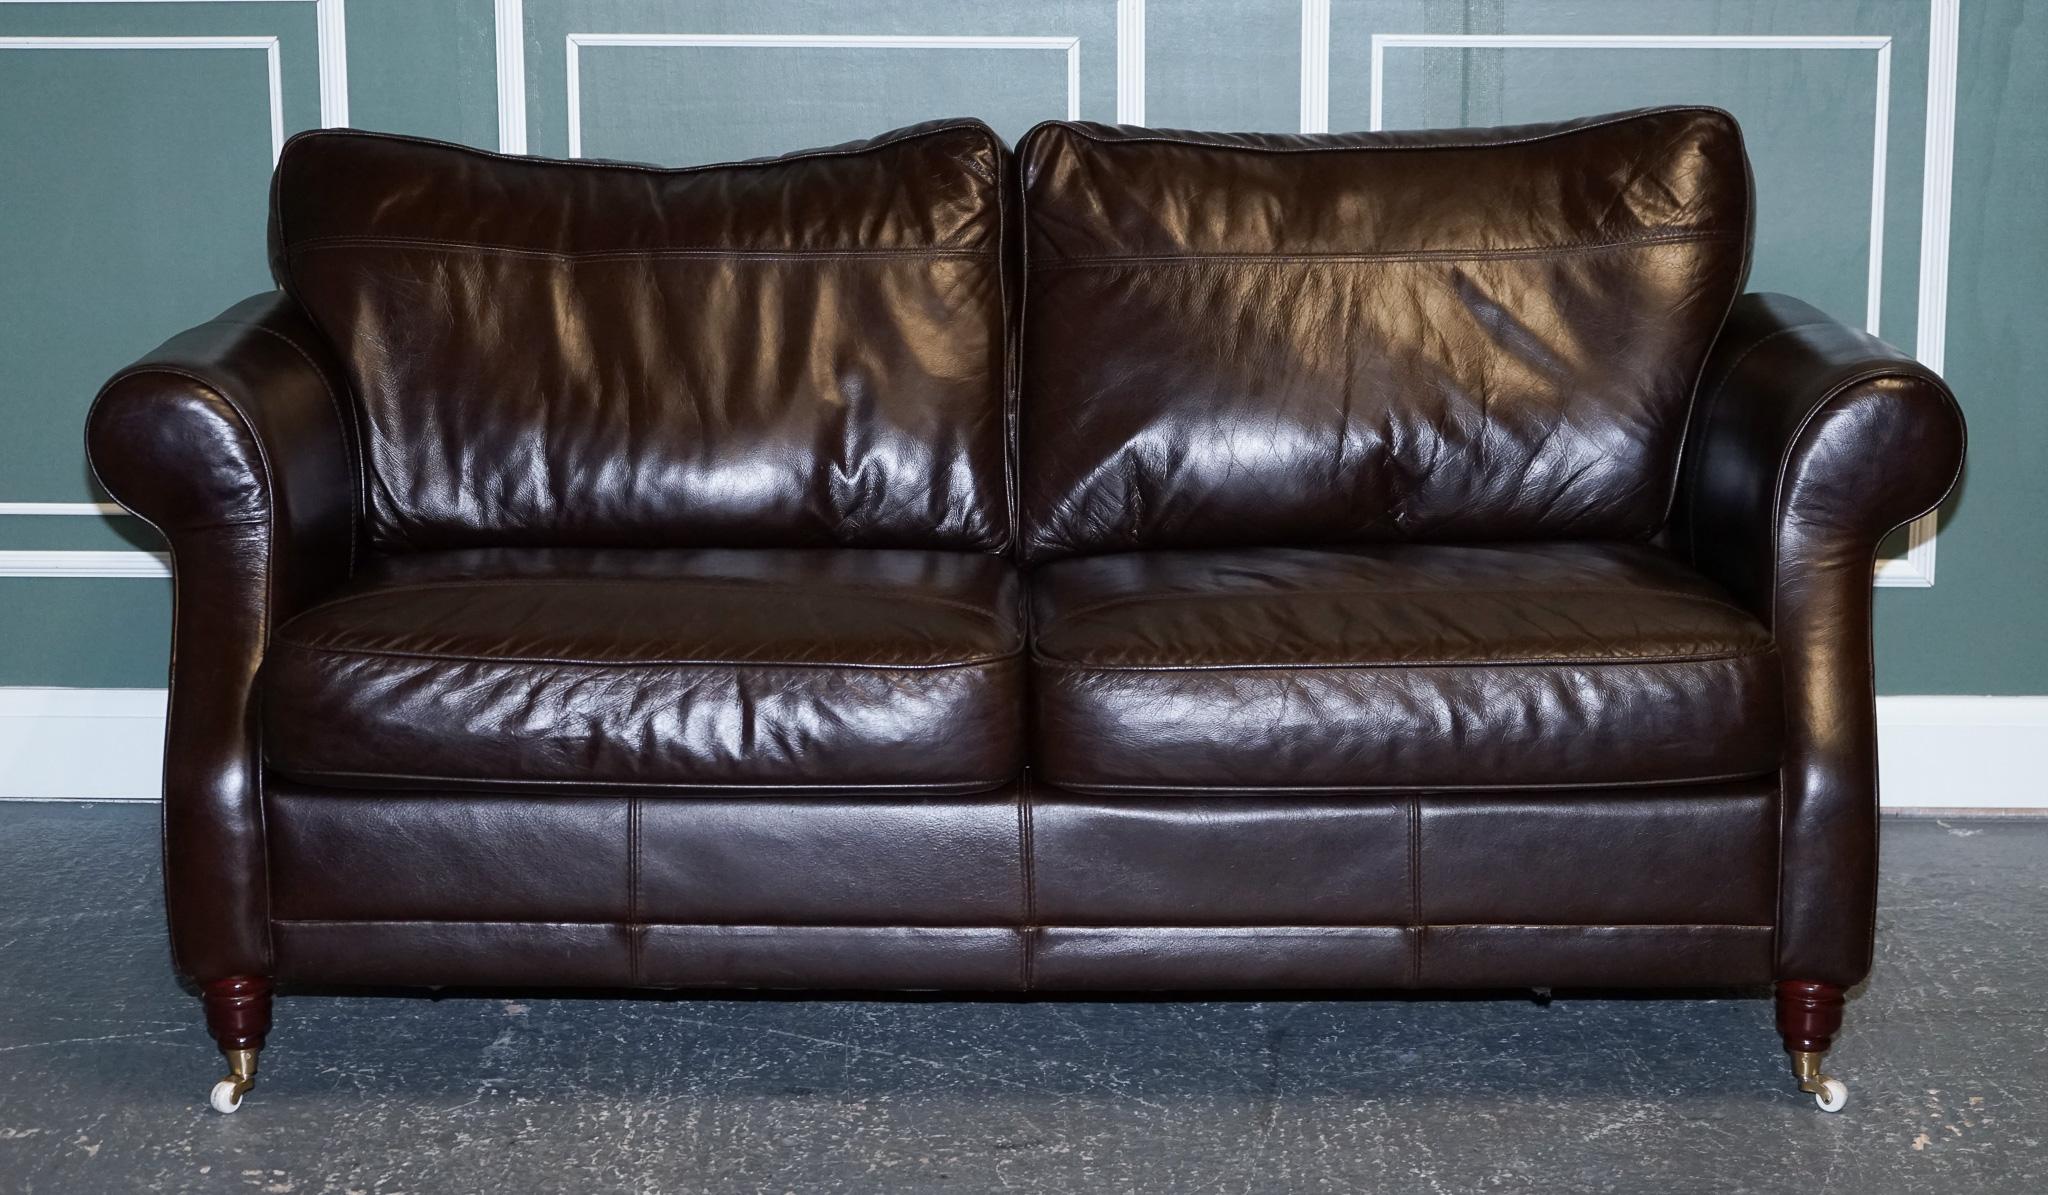 
We are excited to present this stunning chocolate brown leather sofa.

It can sit 2 up to 3 people comfortably.
The sofa is in really good and clean order.
After restoring the leather it came back as new and can go for many years onwards.

We also